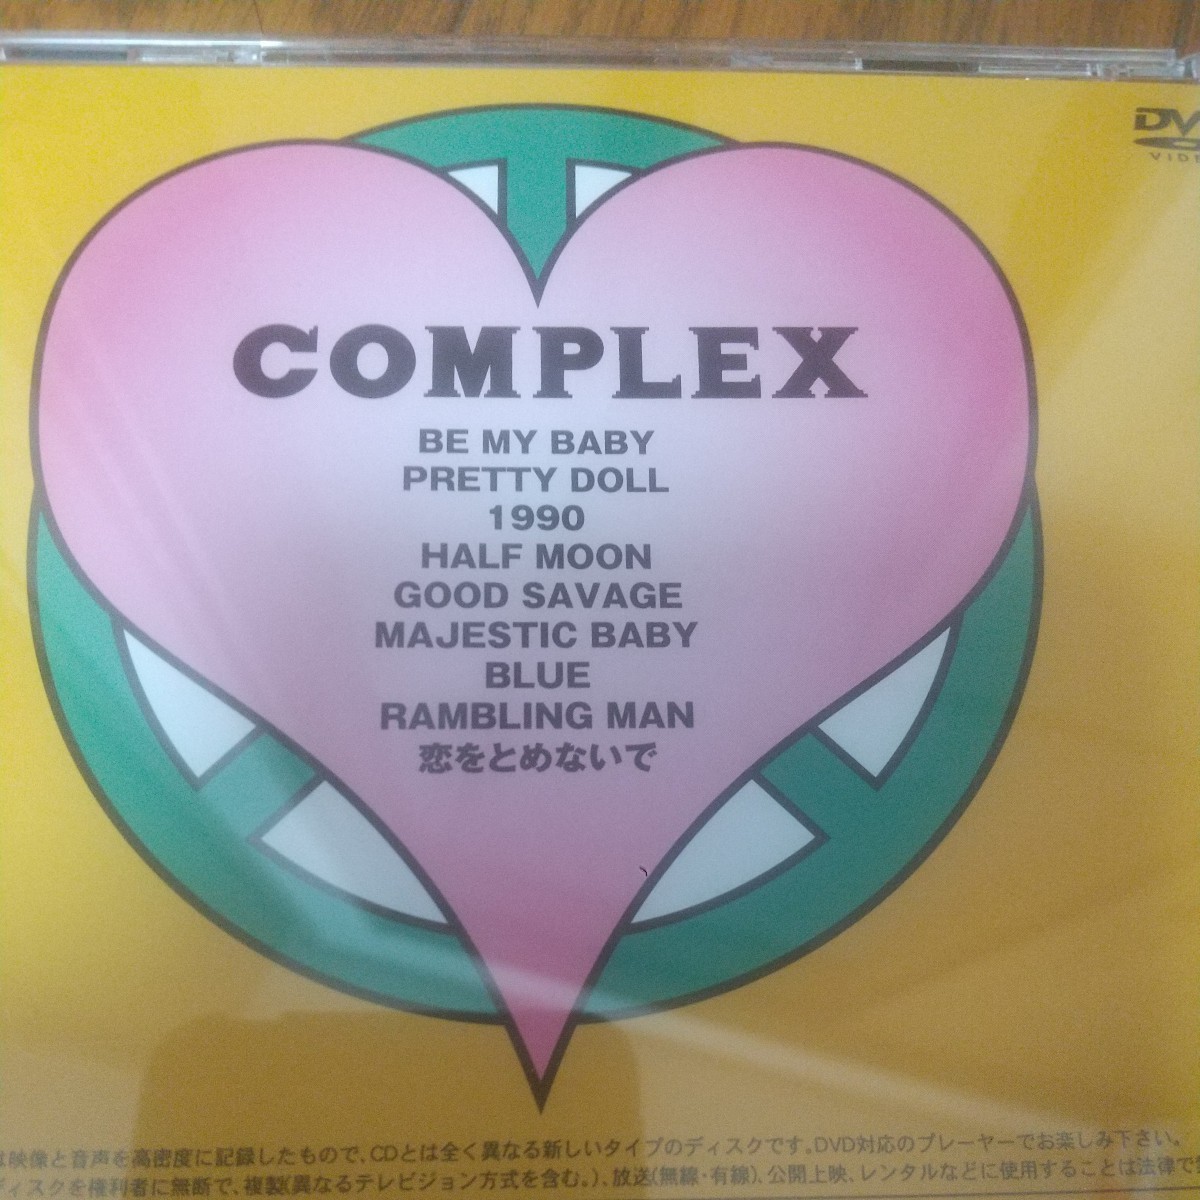 COMPLEX DVD BEST be my baby 吉川晃司 布袋寅泰 リマスタリング VIDEO CLIP_画像2